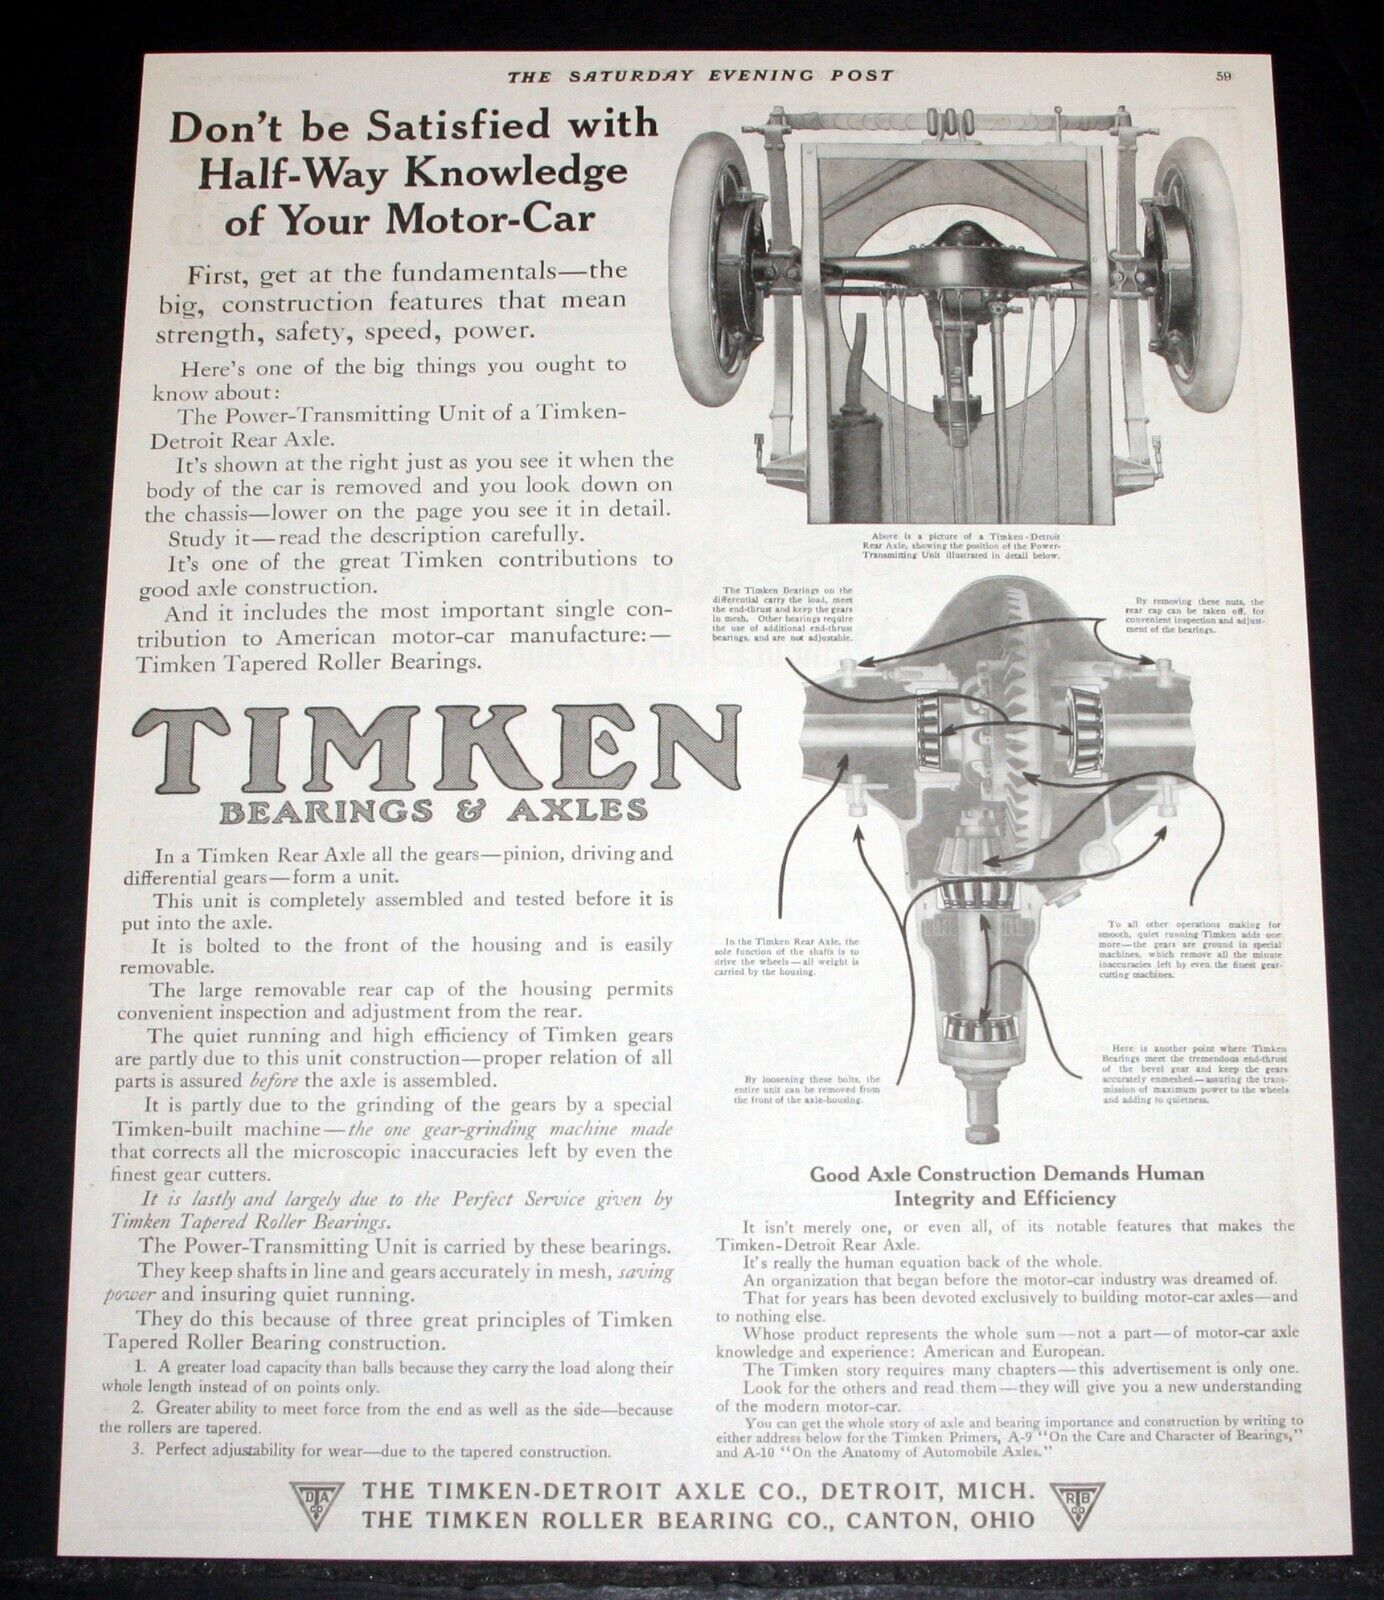 1912 OLD MAGAZINE PRINT AD, TIMKEN BEARINGS & AXLES FOR YOUR MOTOR CAR, KNOW